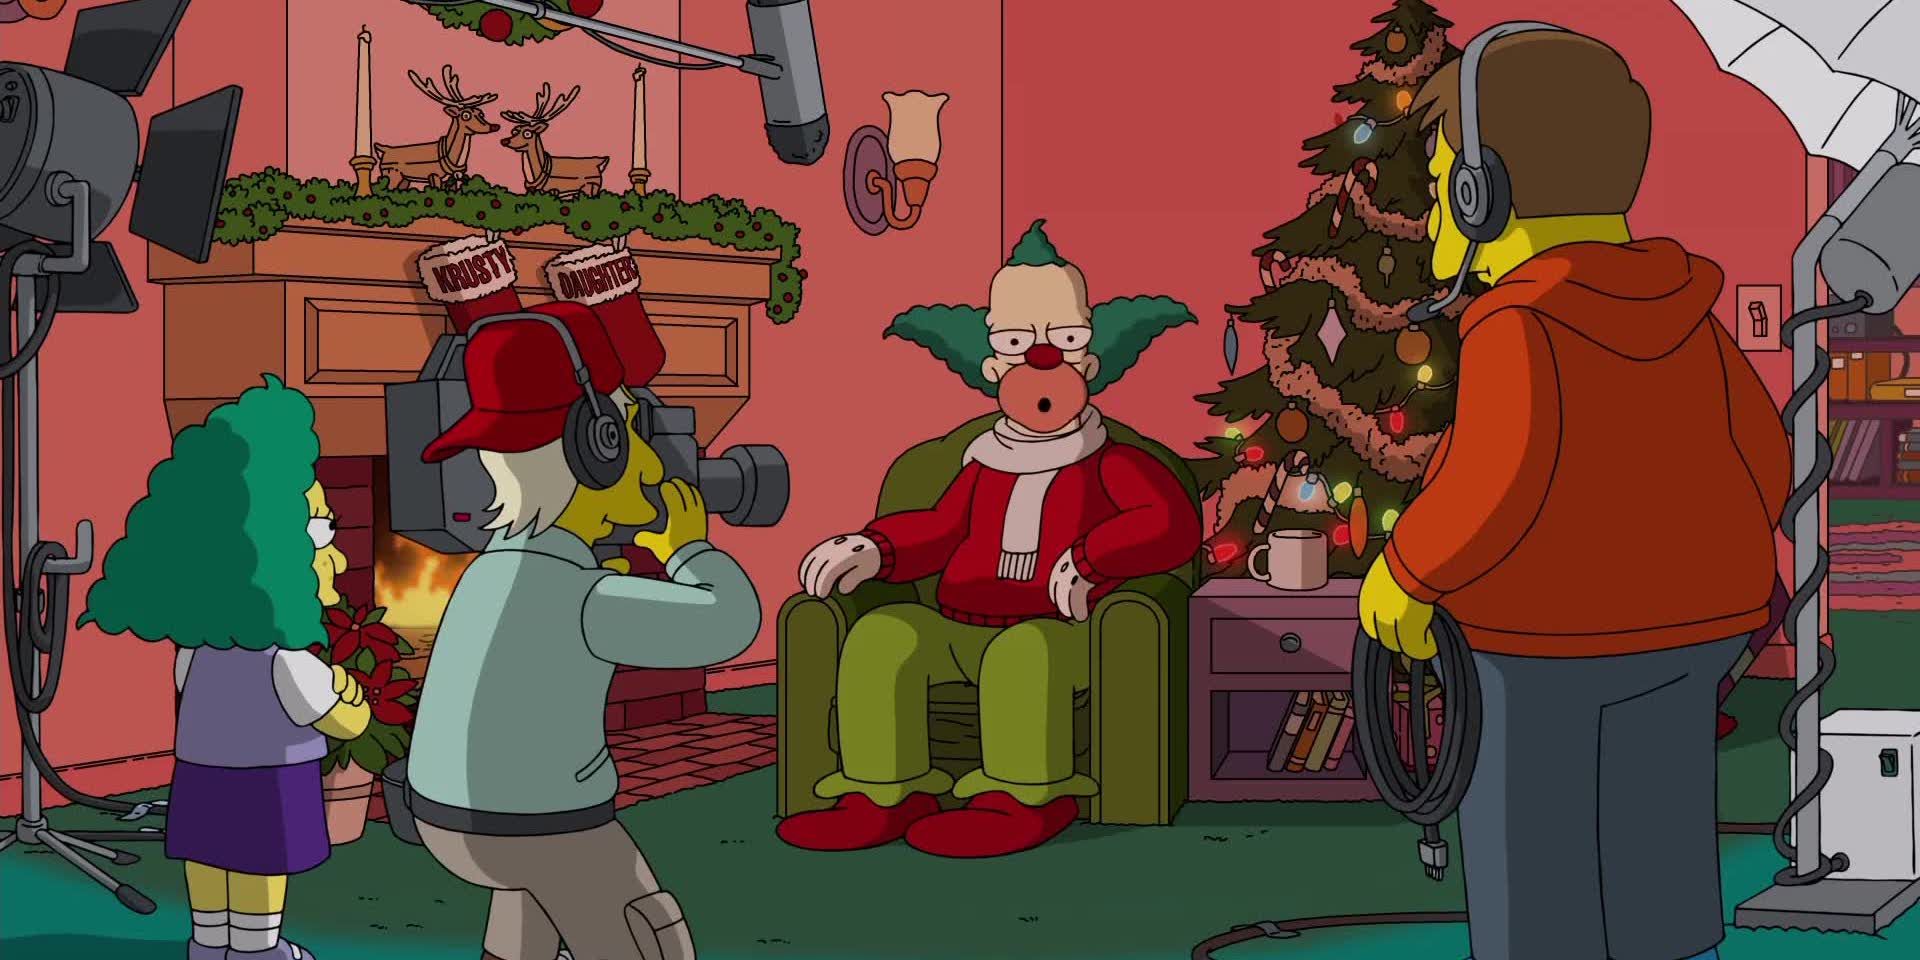 Krusty sitting in a chair beside the Christmas tree in The Simpsons